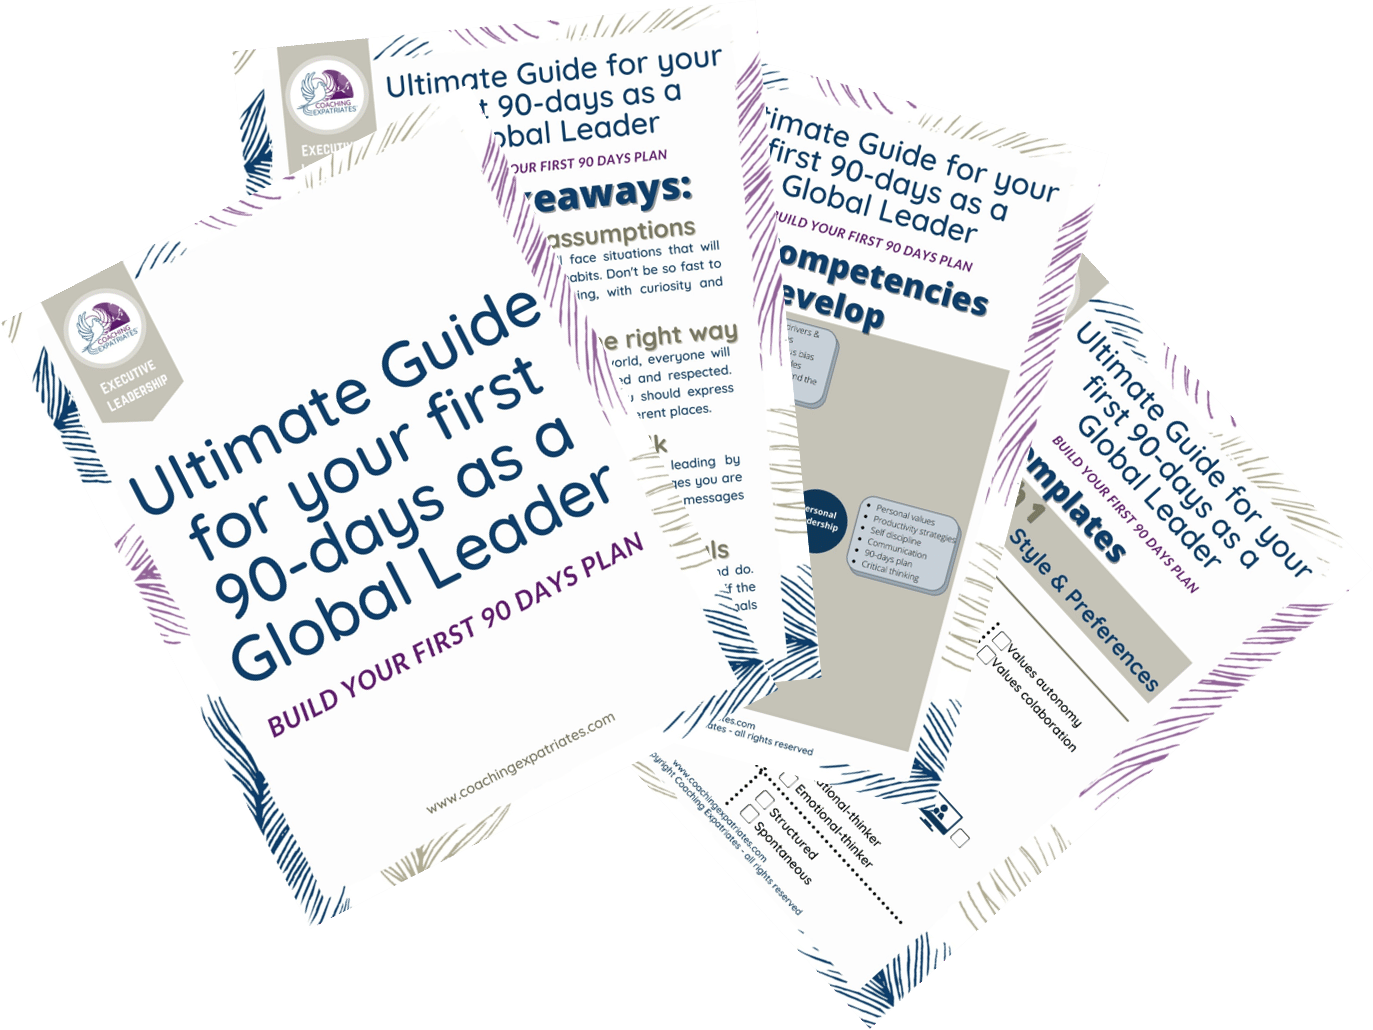 Global Leadership guide for first 90 days